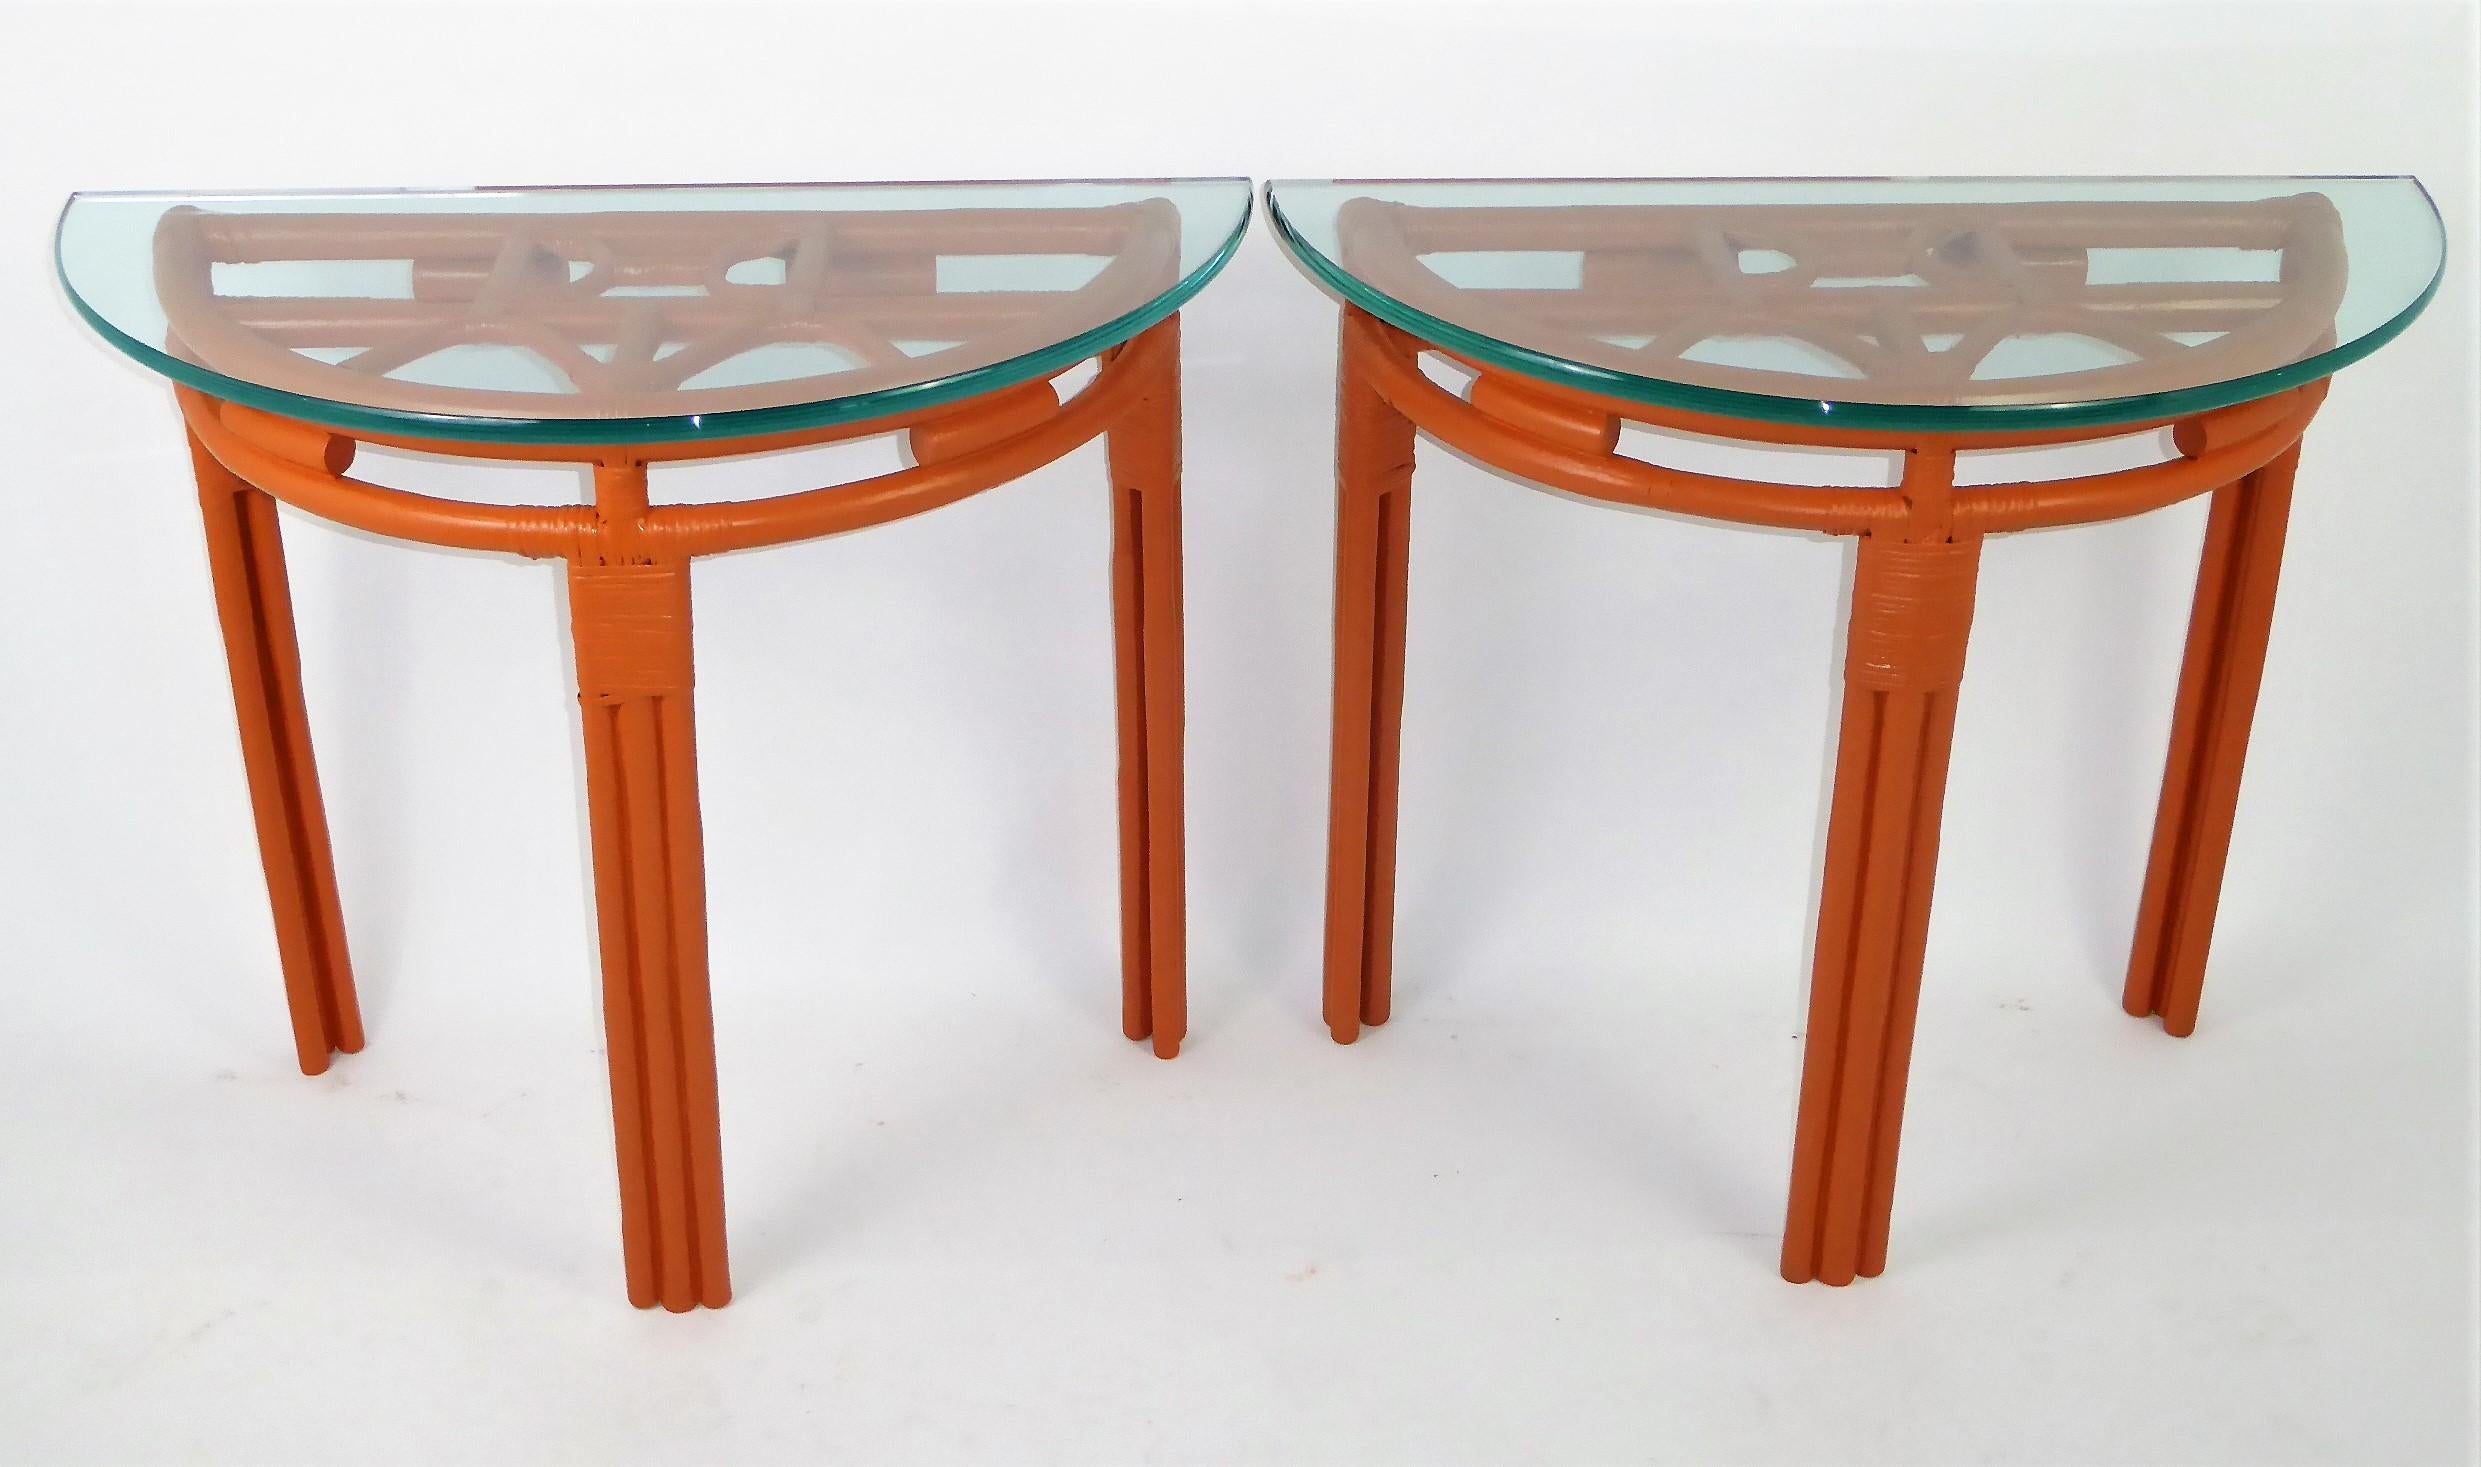 1940s Painted Rattan Demilune Glass Top Consoles in Hermes Orange 9